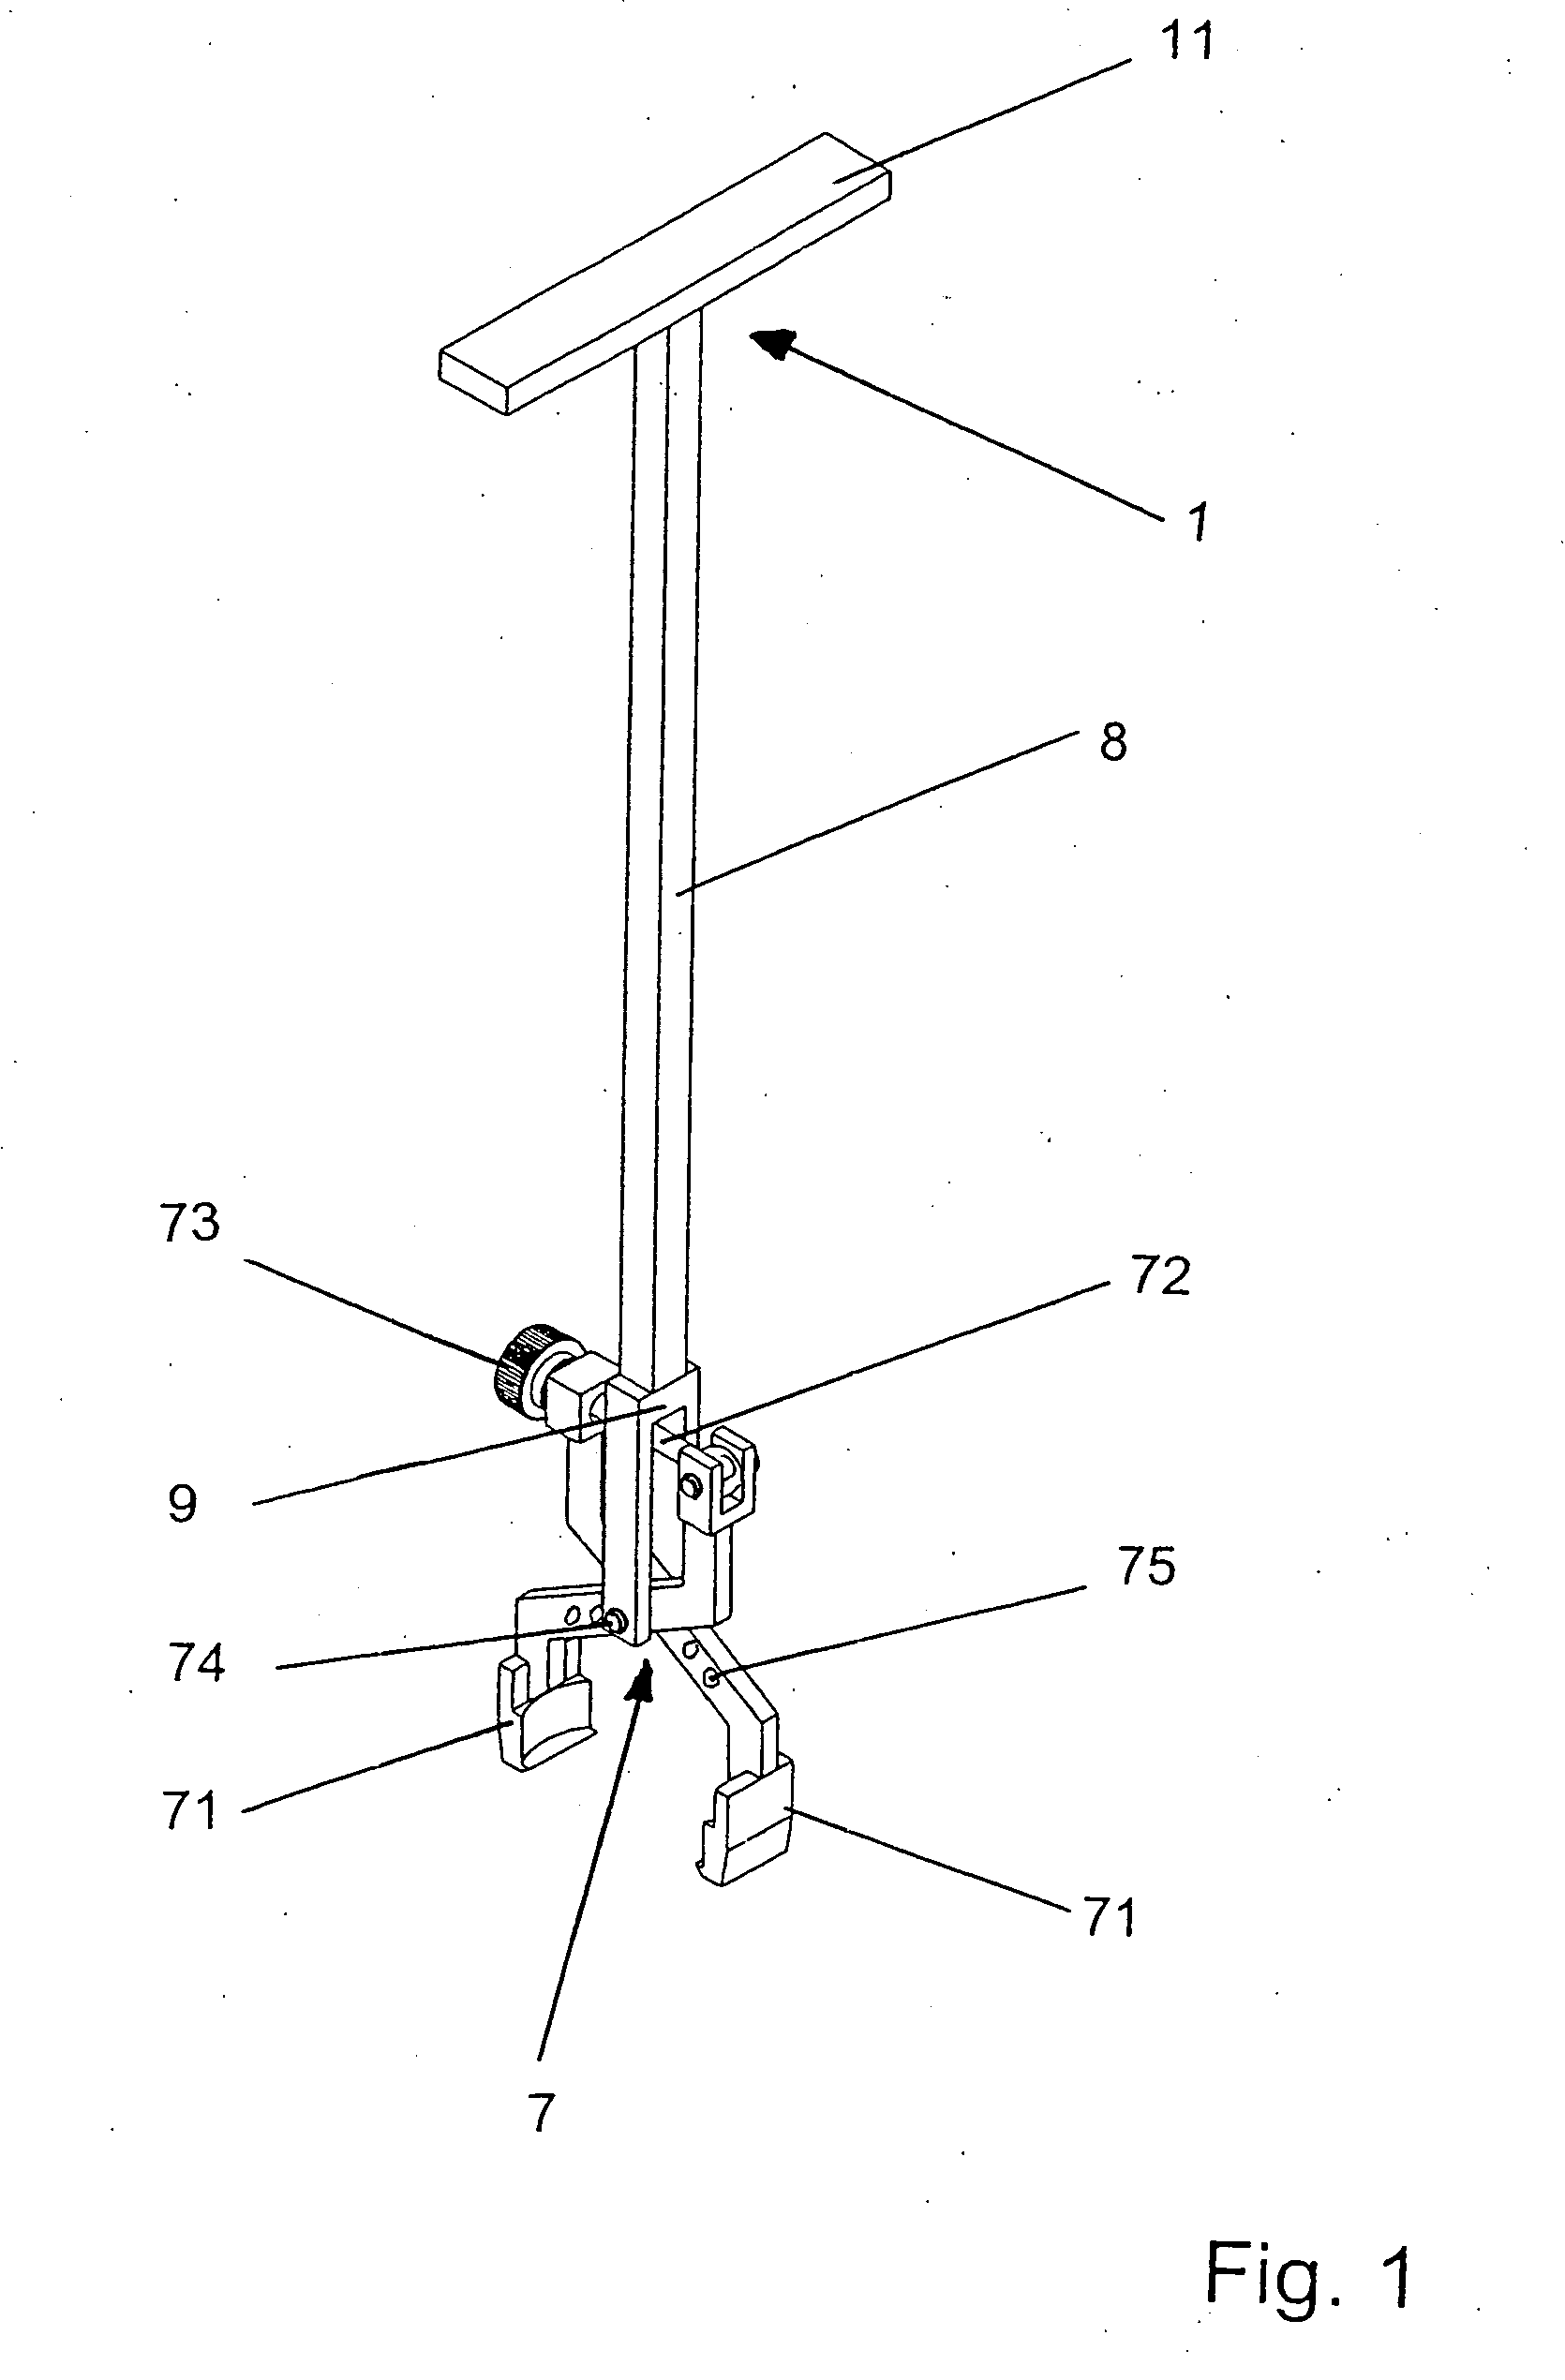 Universal extractor for total endoprostheses of (tep) of the knee joint